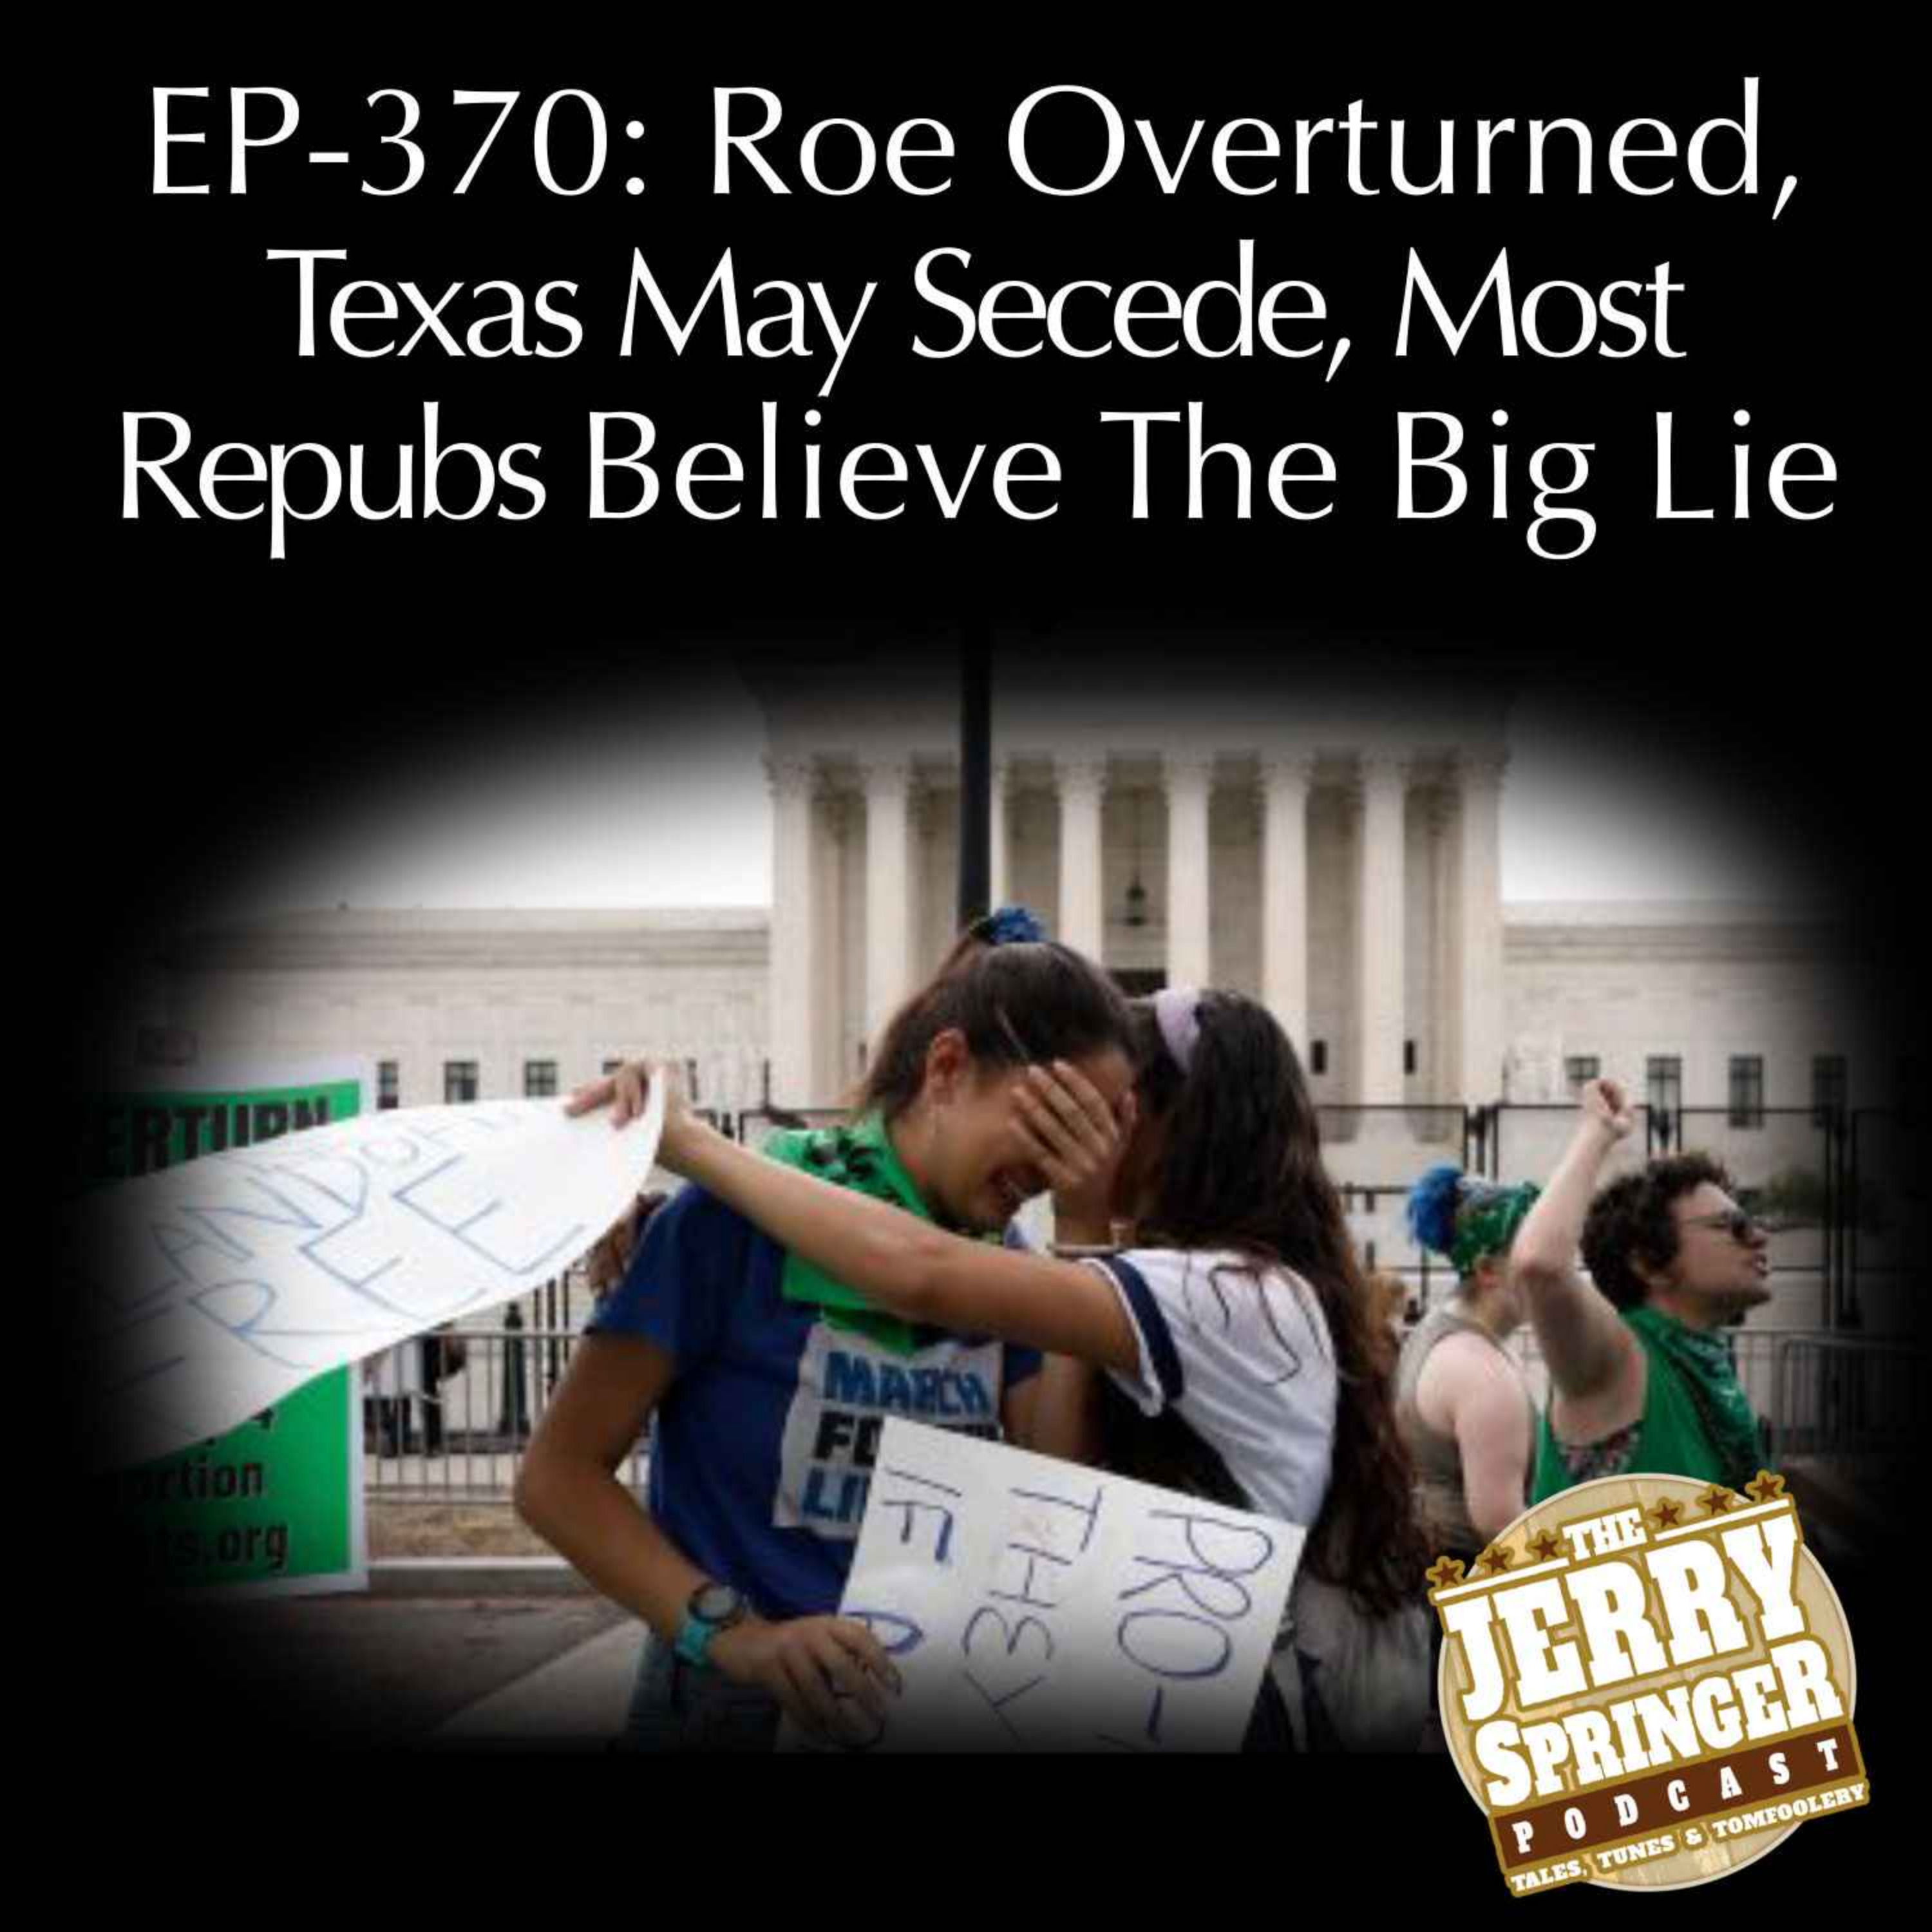 Roe Overturned, Texas May Secede, Most Repubs Believe The Big Lie: EP - 370